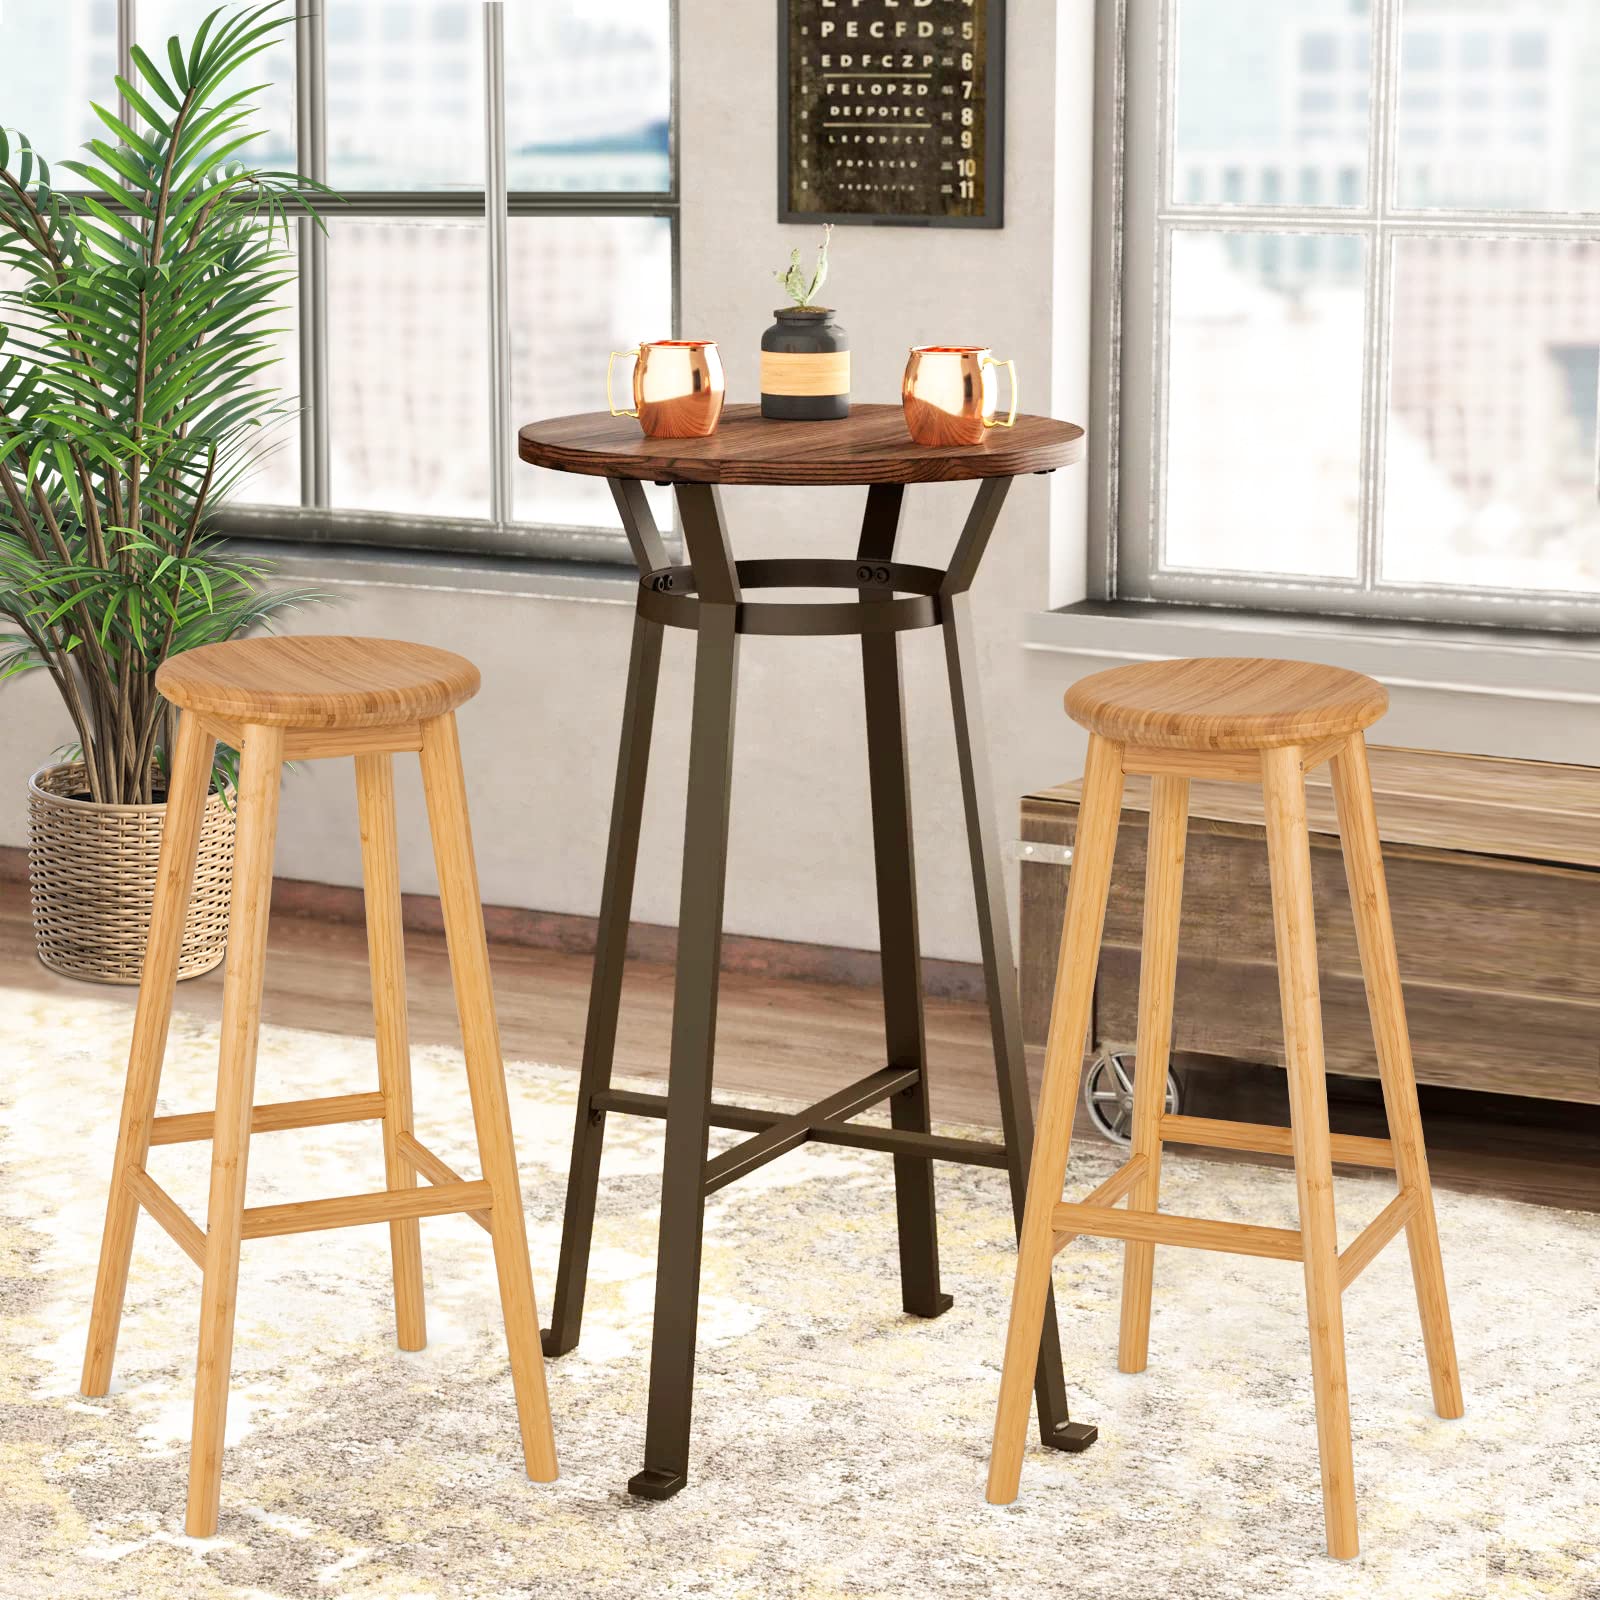 Giantex Bamboo Bar Stools, 31-Inch Height Round Seat Breakfast Dining Chairs with Footrest